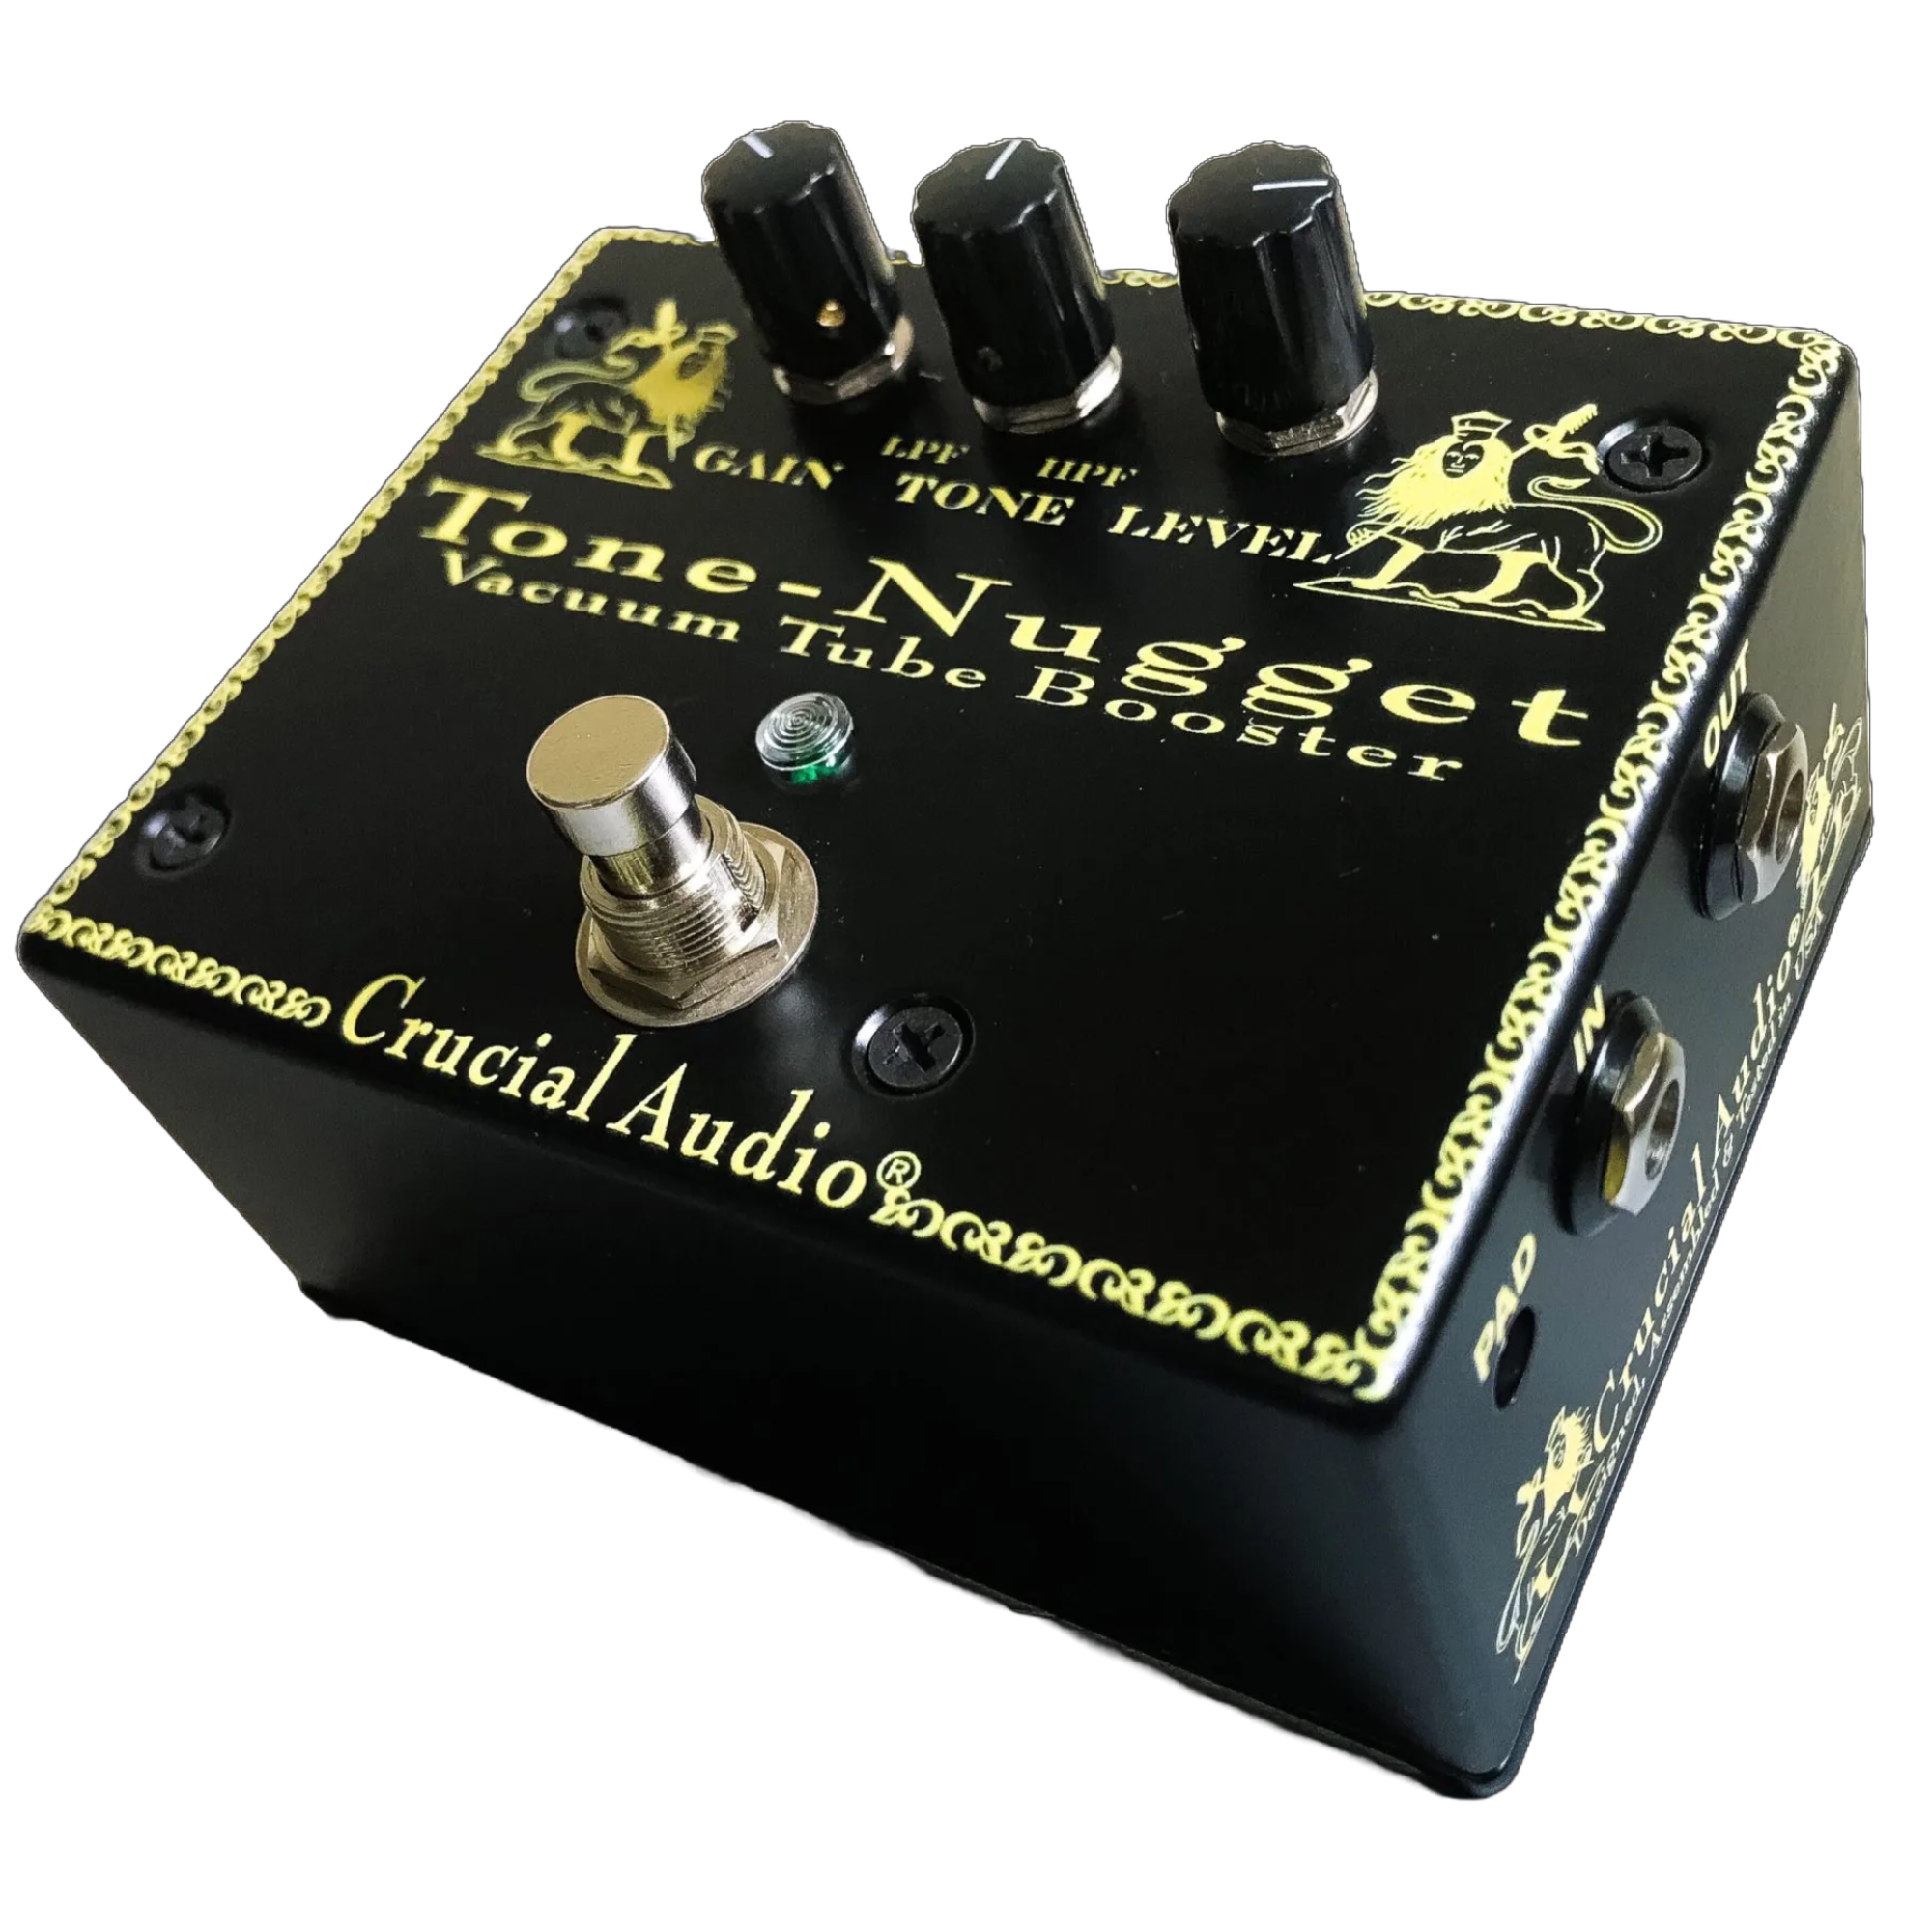 The Tone-Nugget Vacuum Tube Booster & Tone Sweetener, Crucial Audio, vacuum tube pedal booster, ruby tubes